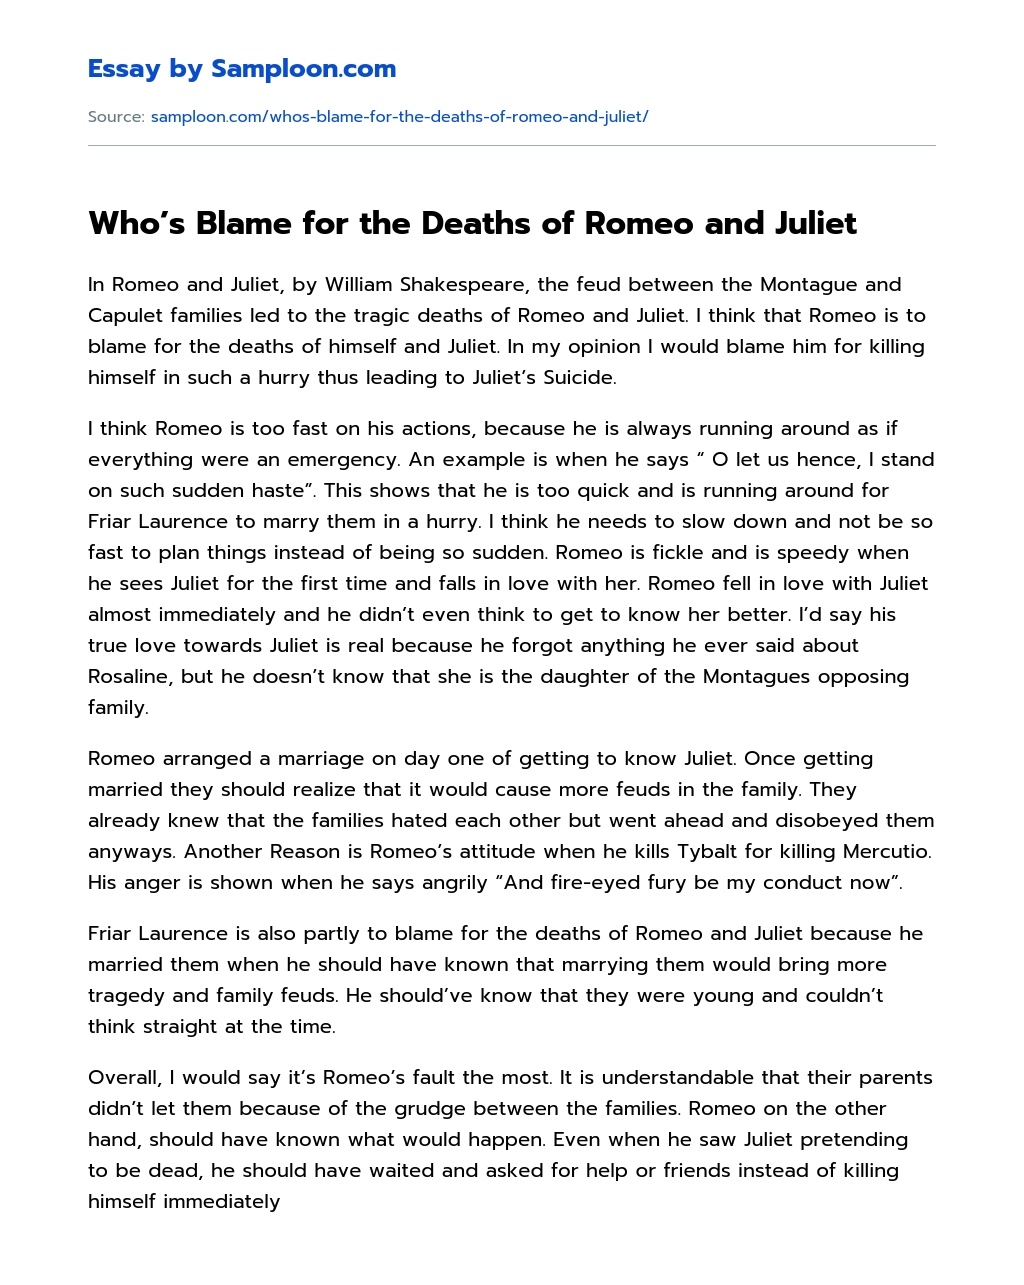 Реферат: Romeo And Juliet Who Is To Blame